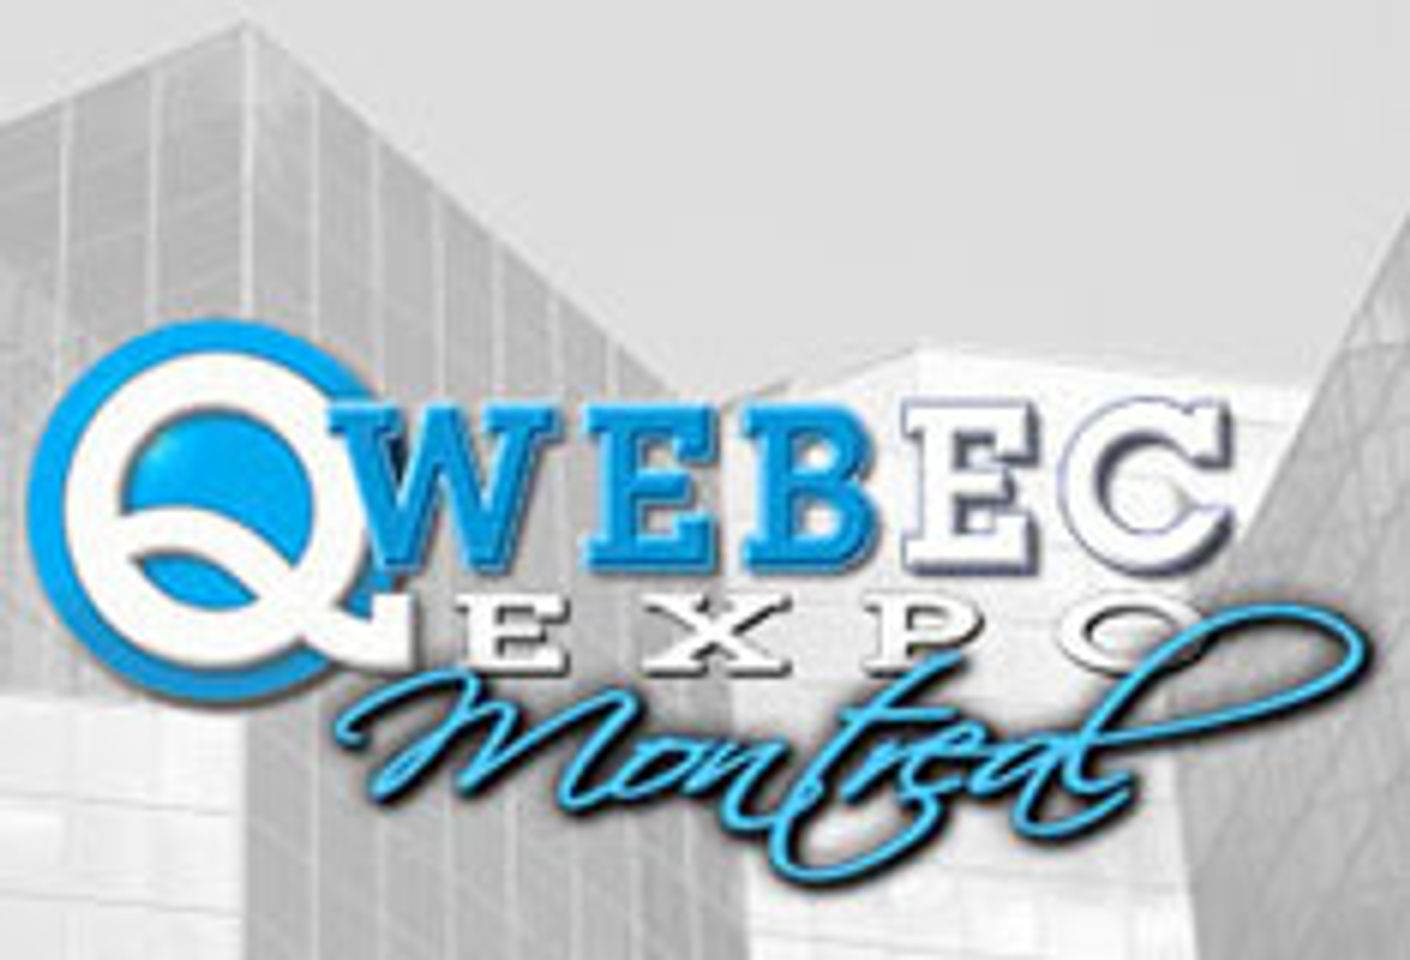 Noted Historian of Psychology to Speak at Qwebec Expo